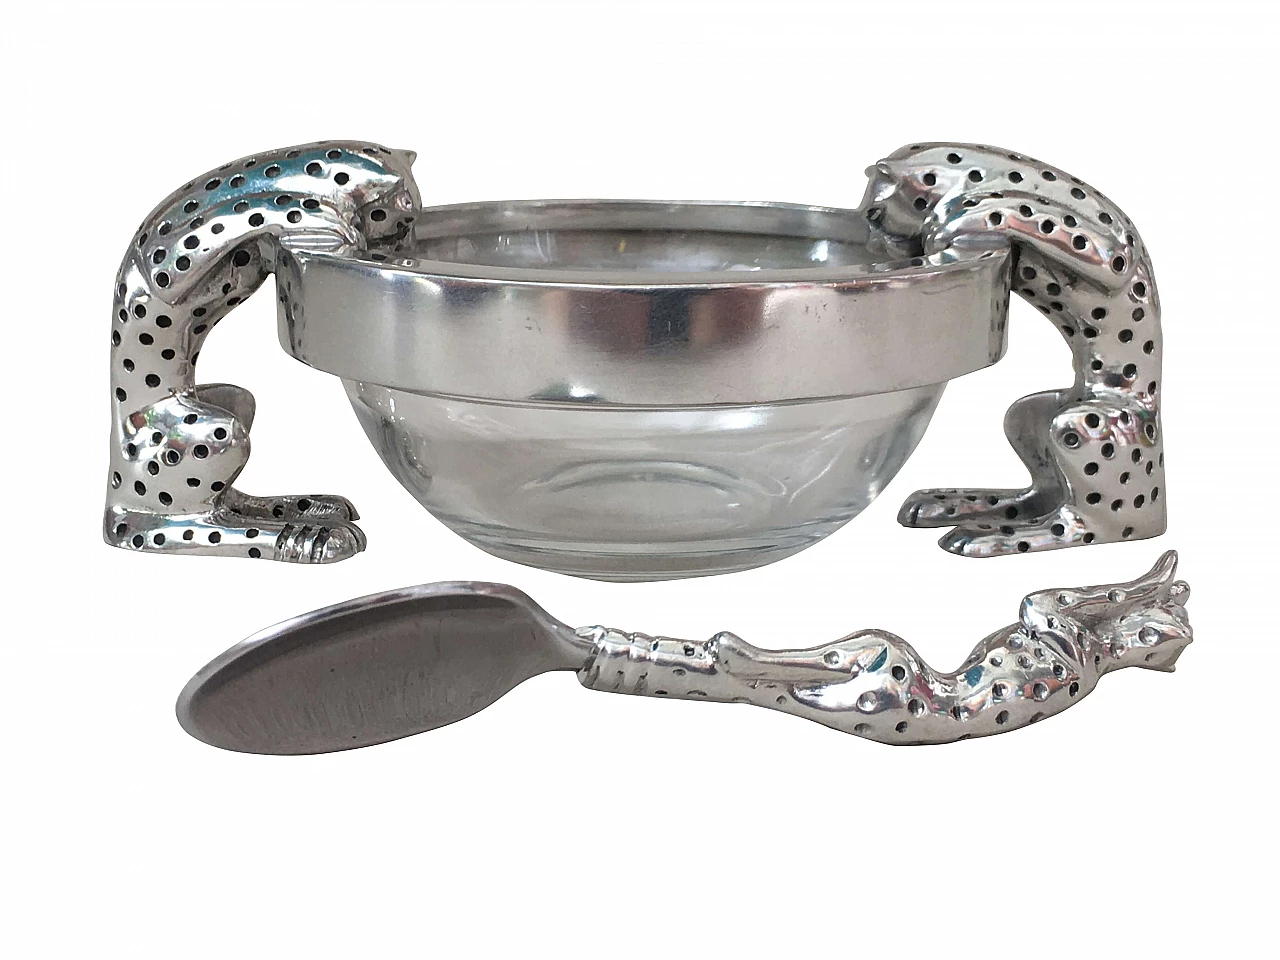 Glass and metal bowl and spoon with cheetahs 16